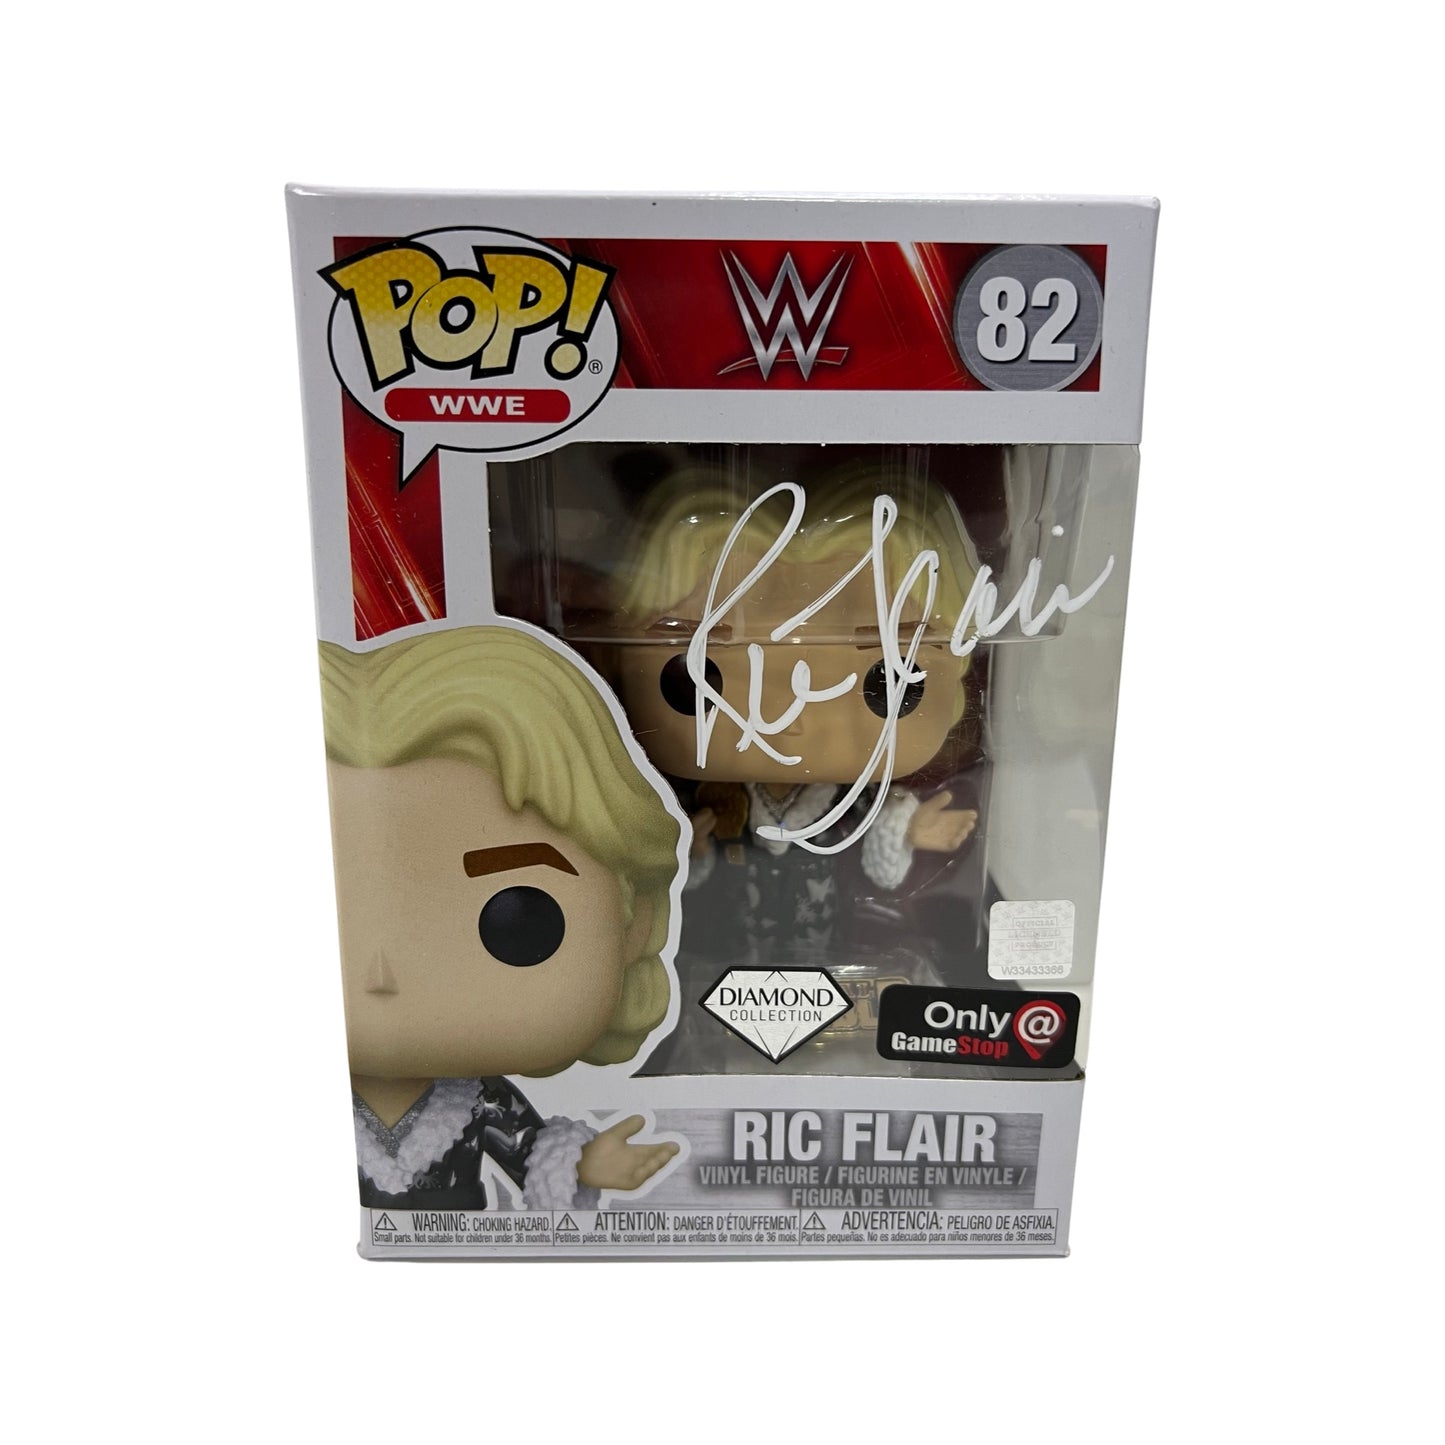 Ric Flair Autographed WWE Diamond Collection Funko Pop #82 Steiner CX